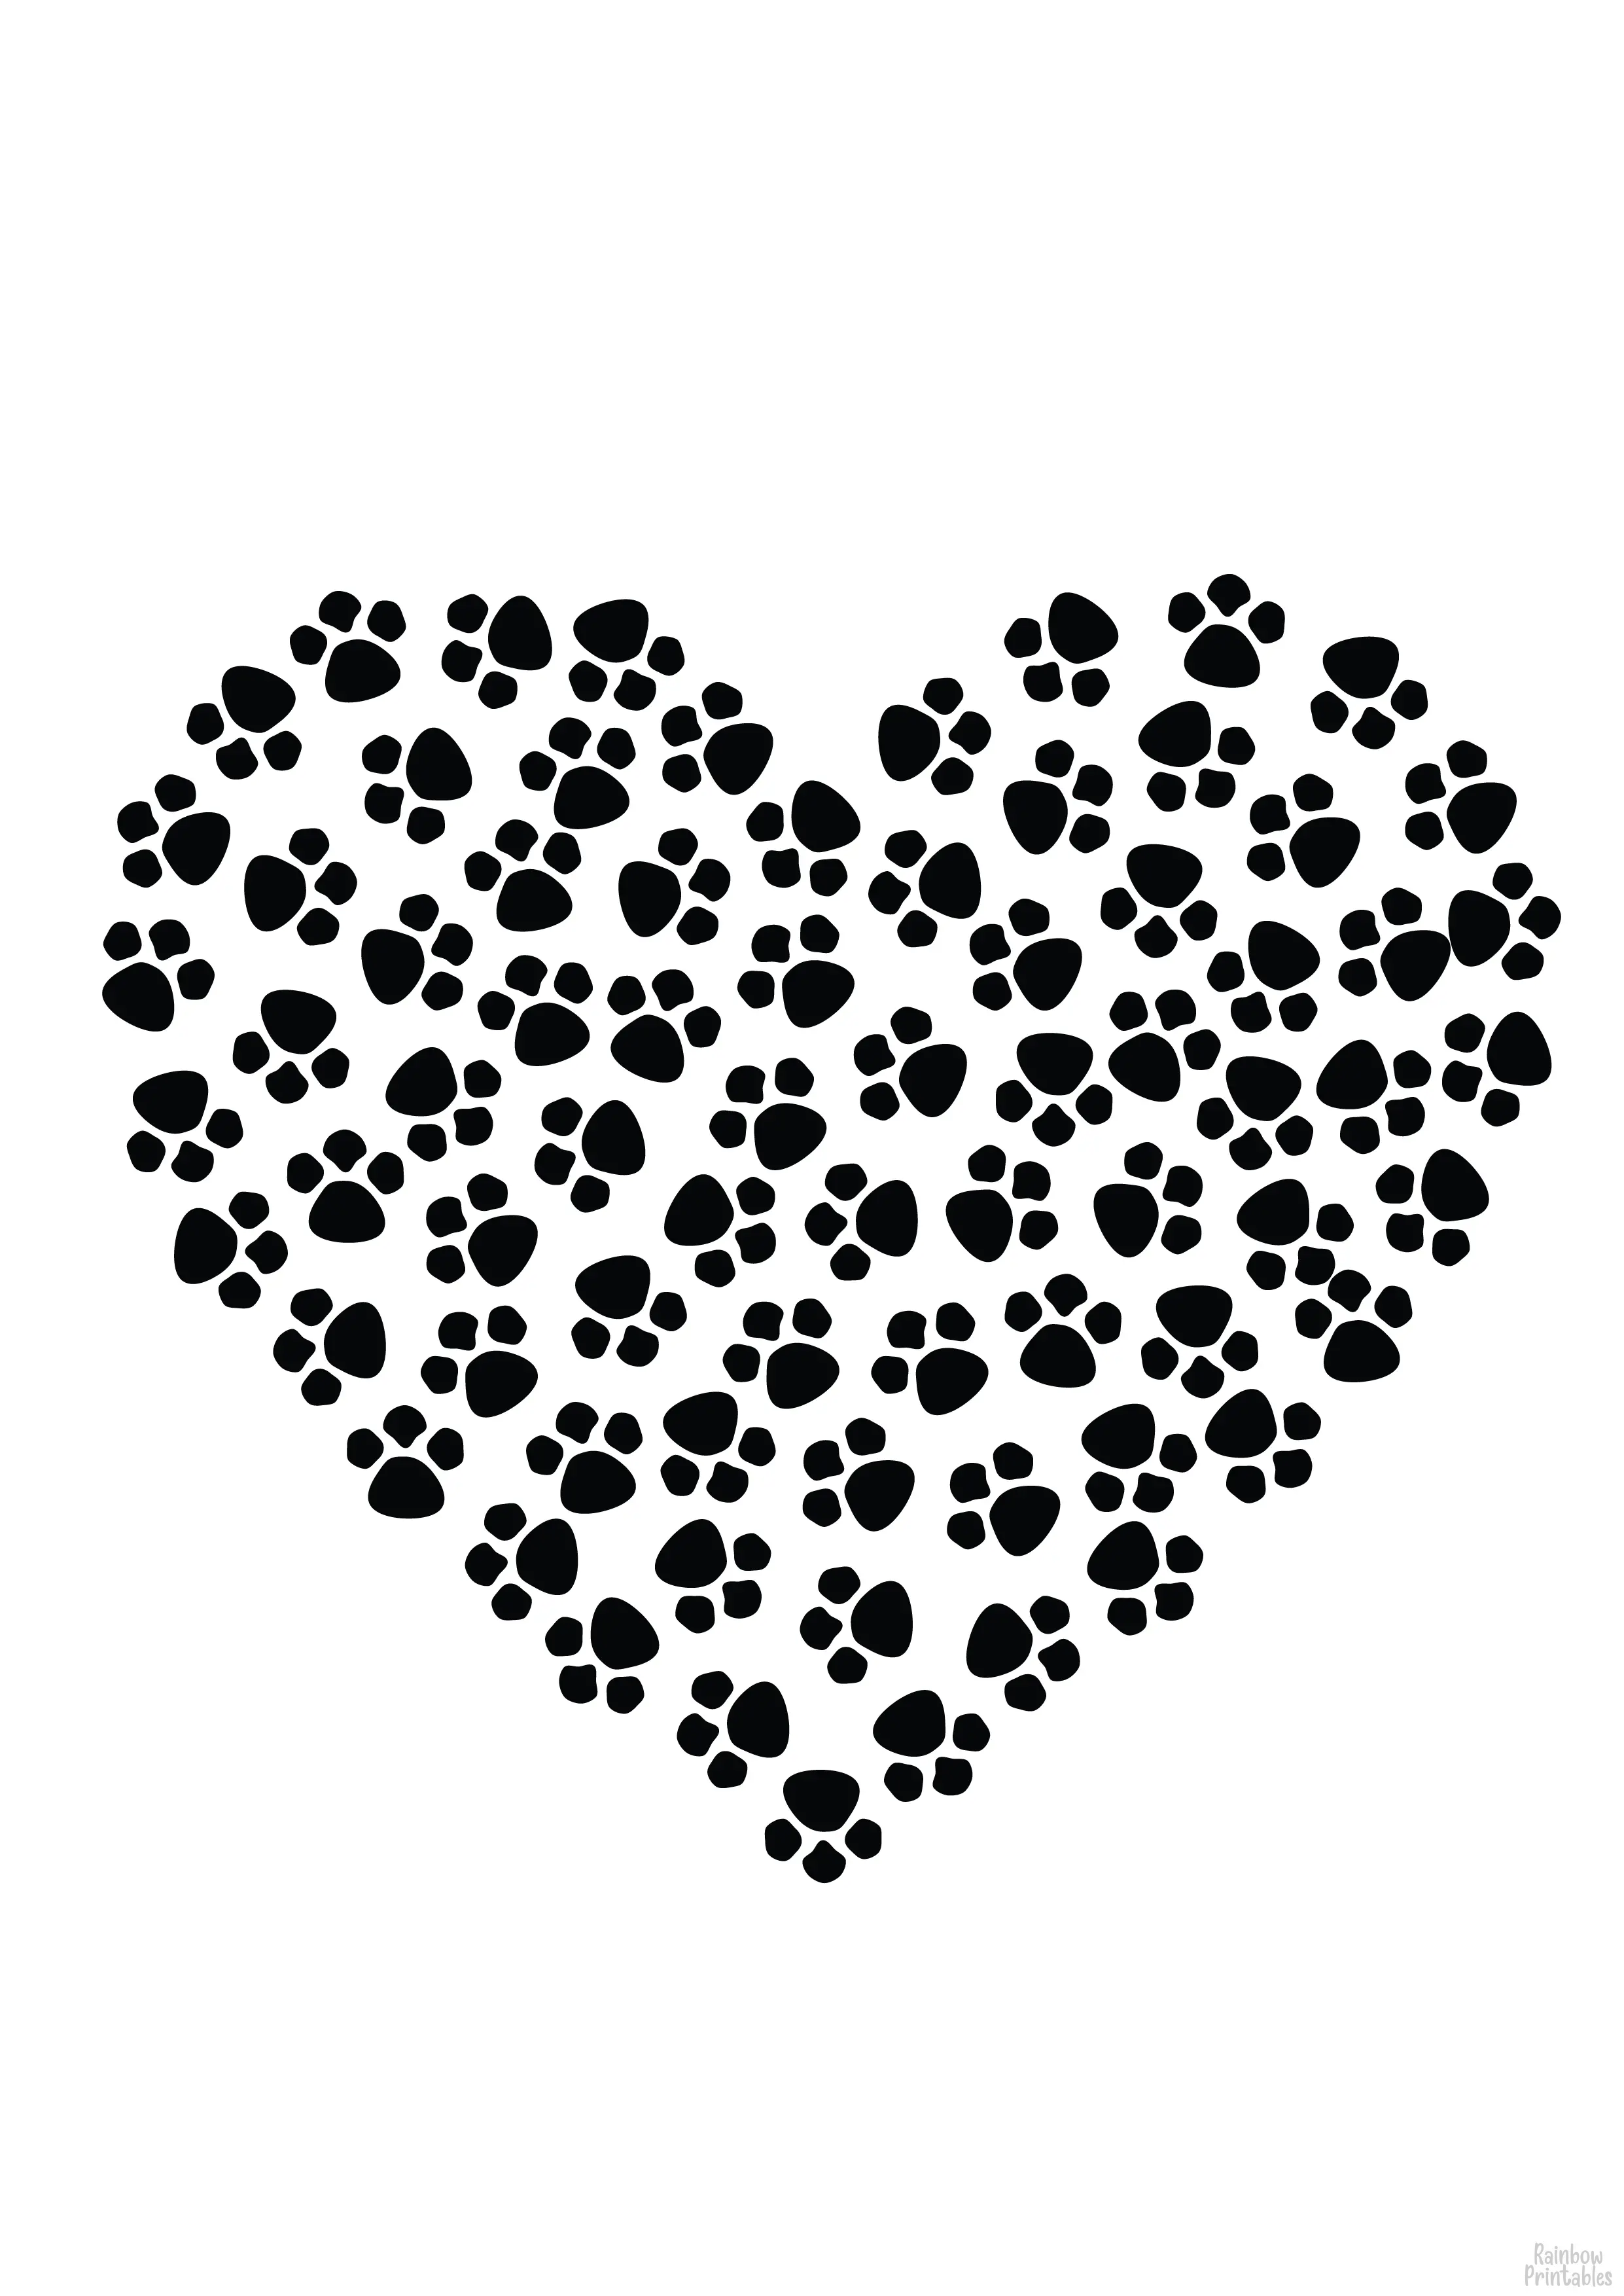 Valentine DAY PAWS HEART SHAPE Clipart Coloring Pages for Kids Adults Art Activities Line Art-10